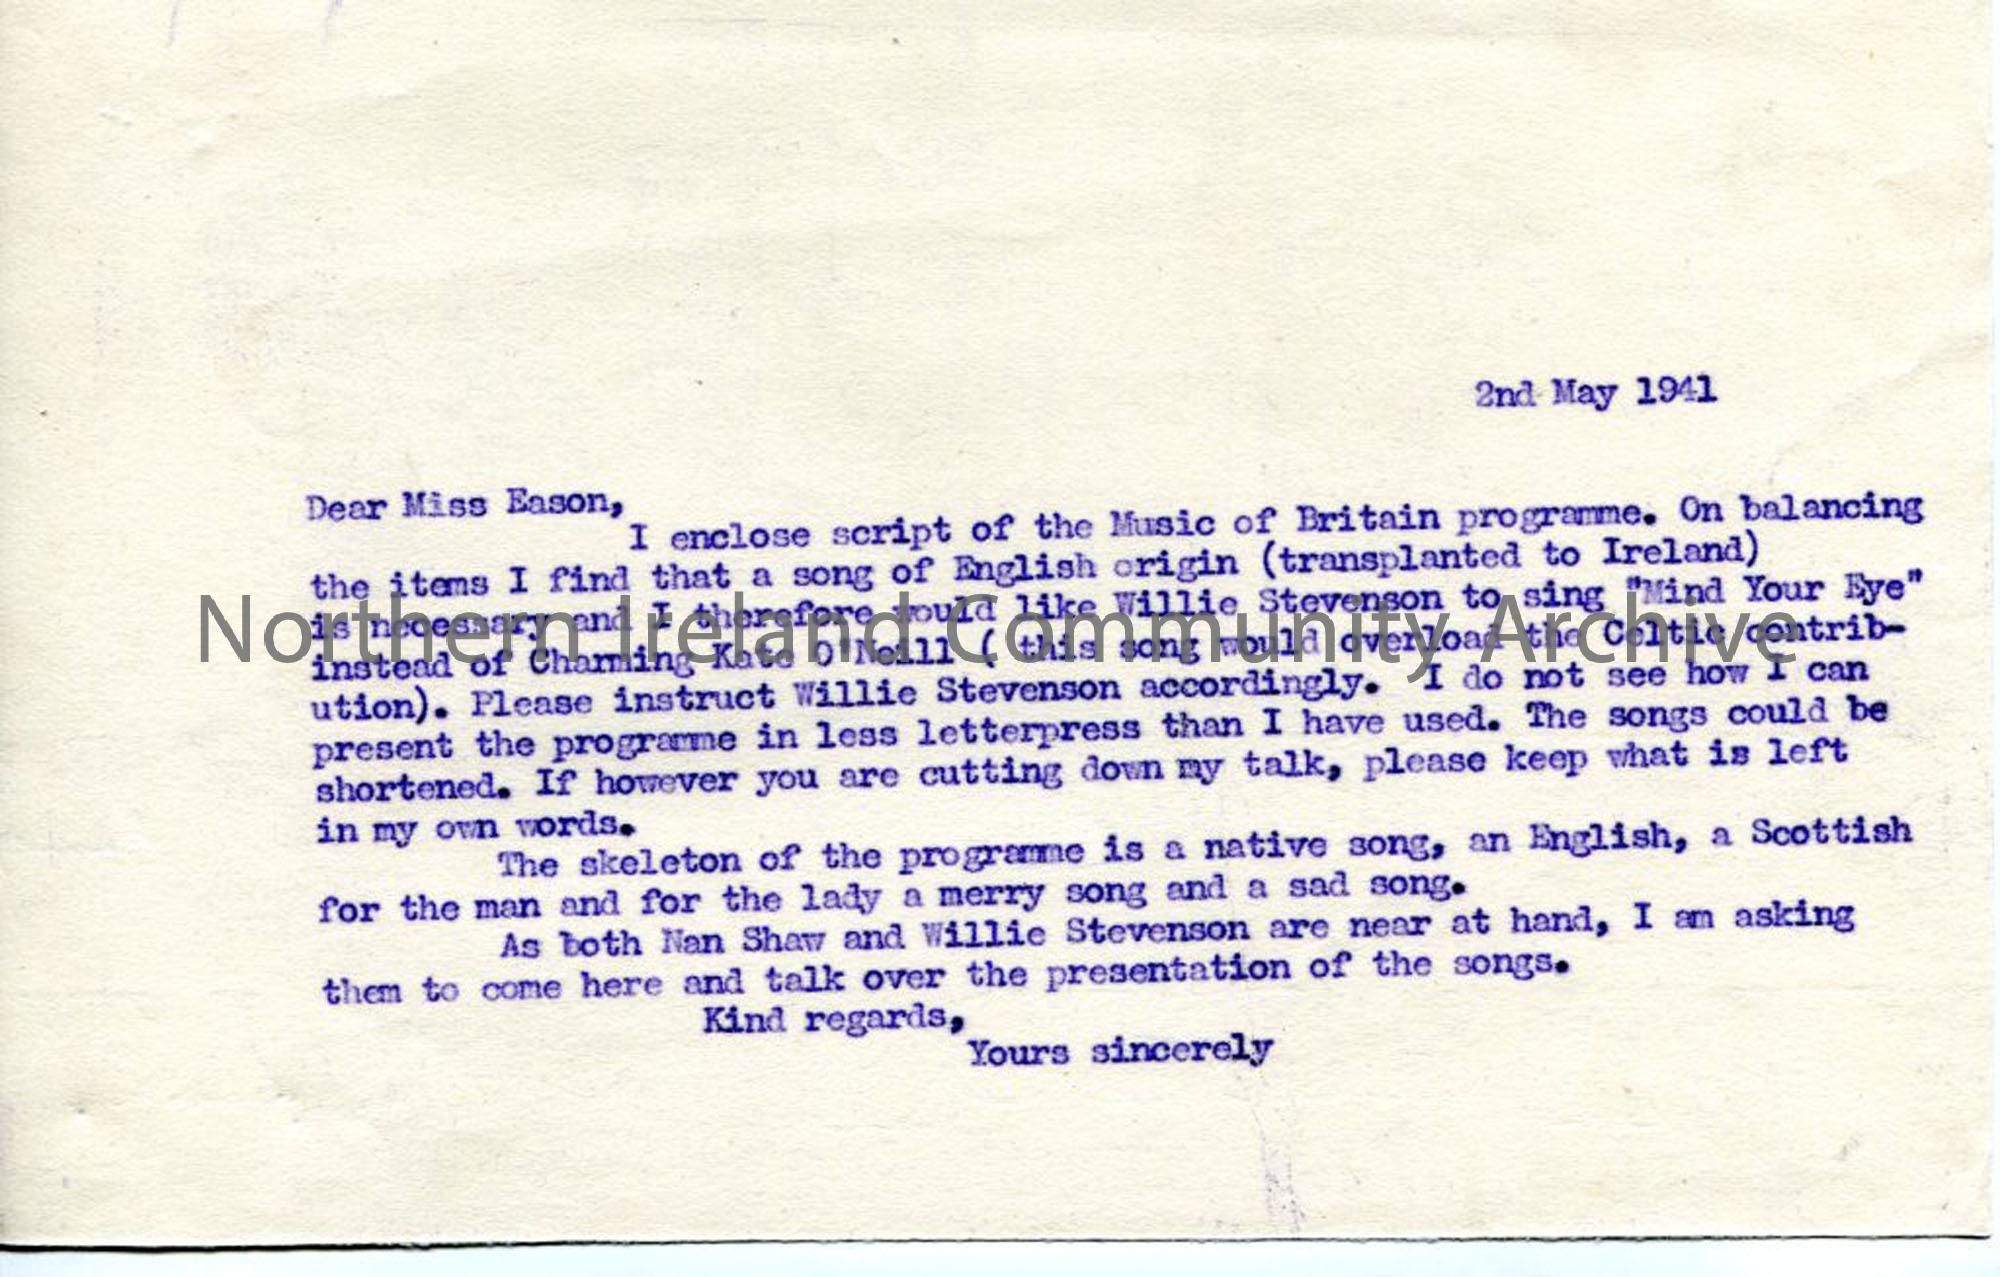 Letter to Miss Eason of the BBC from Sam Henry, dated 2.5.1941